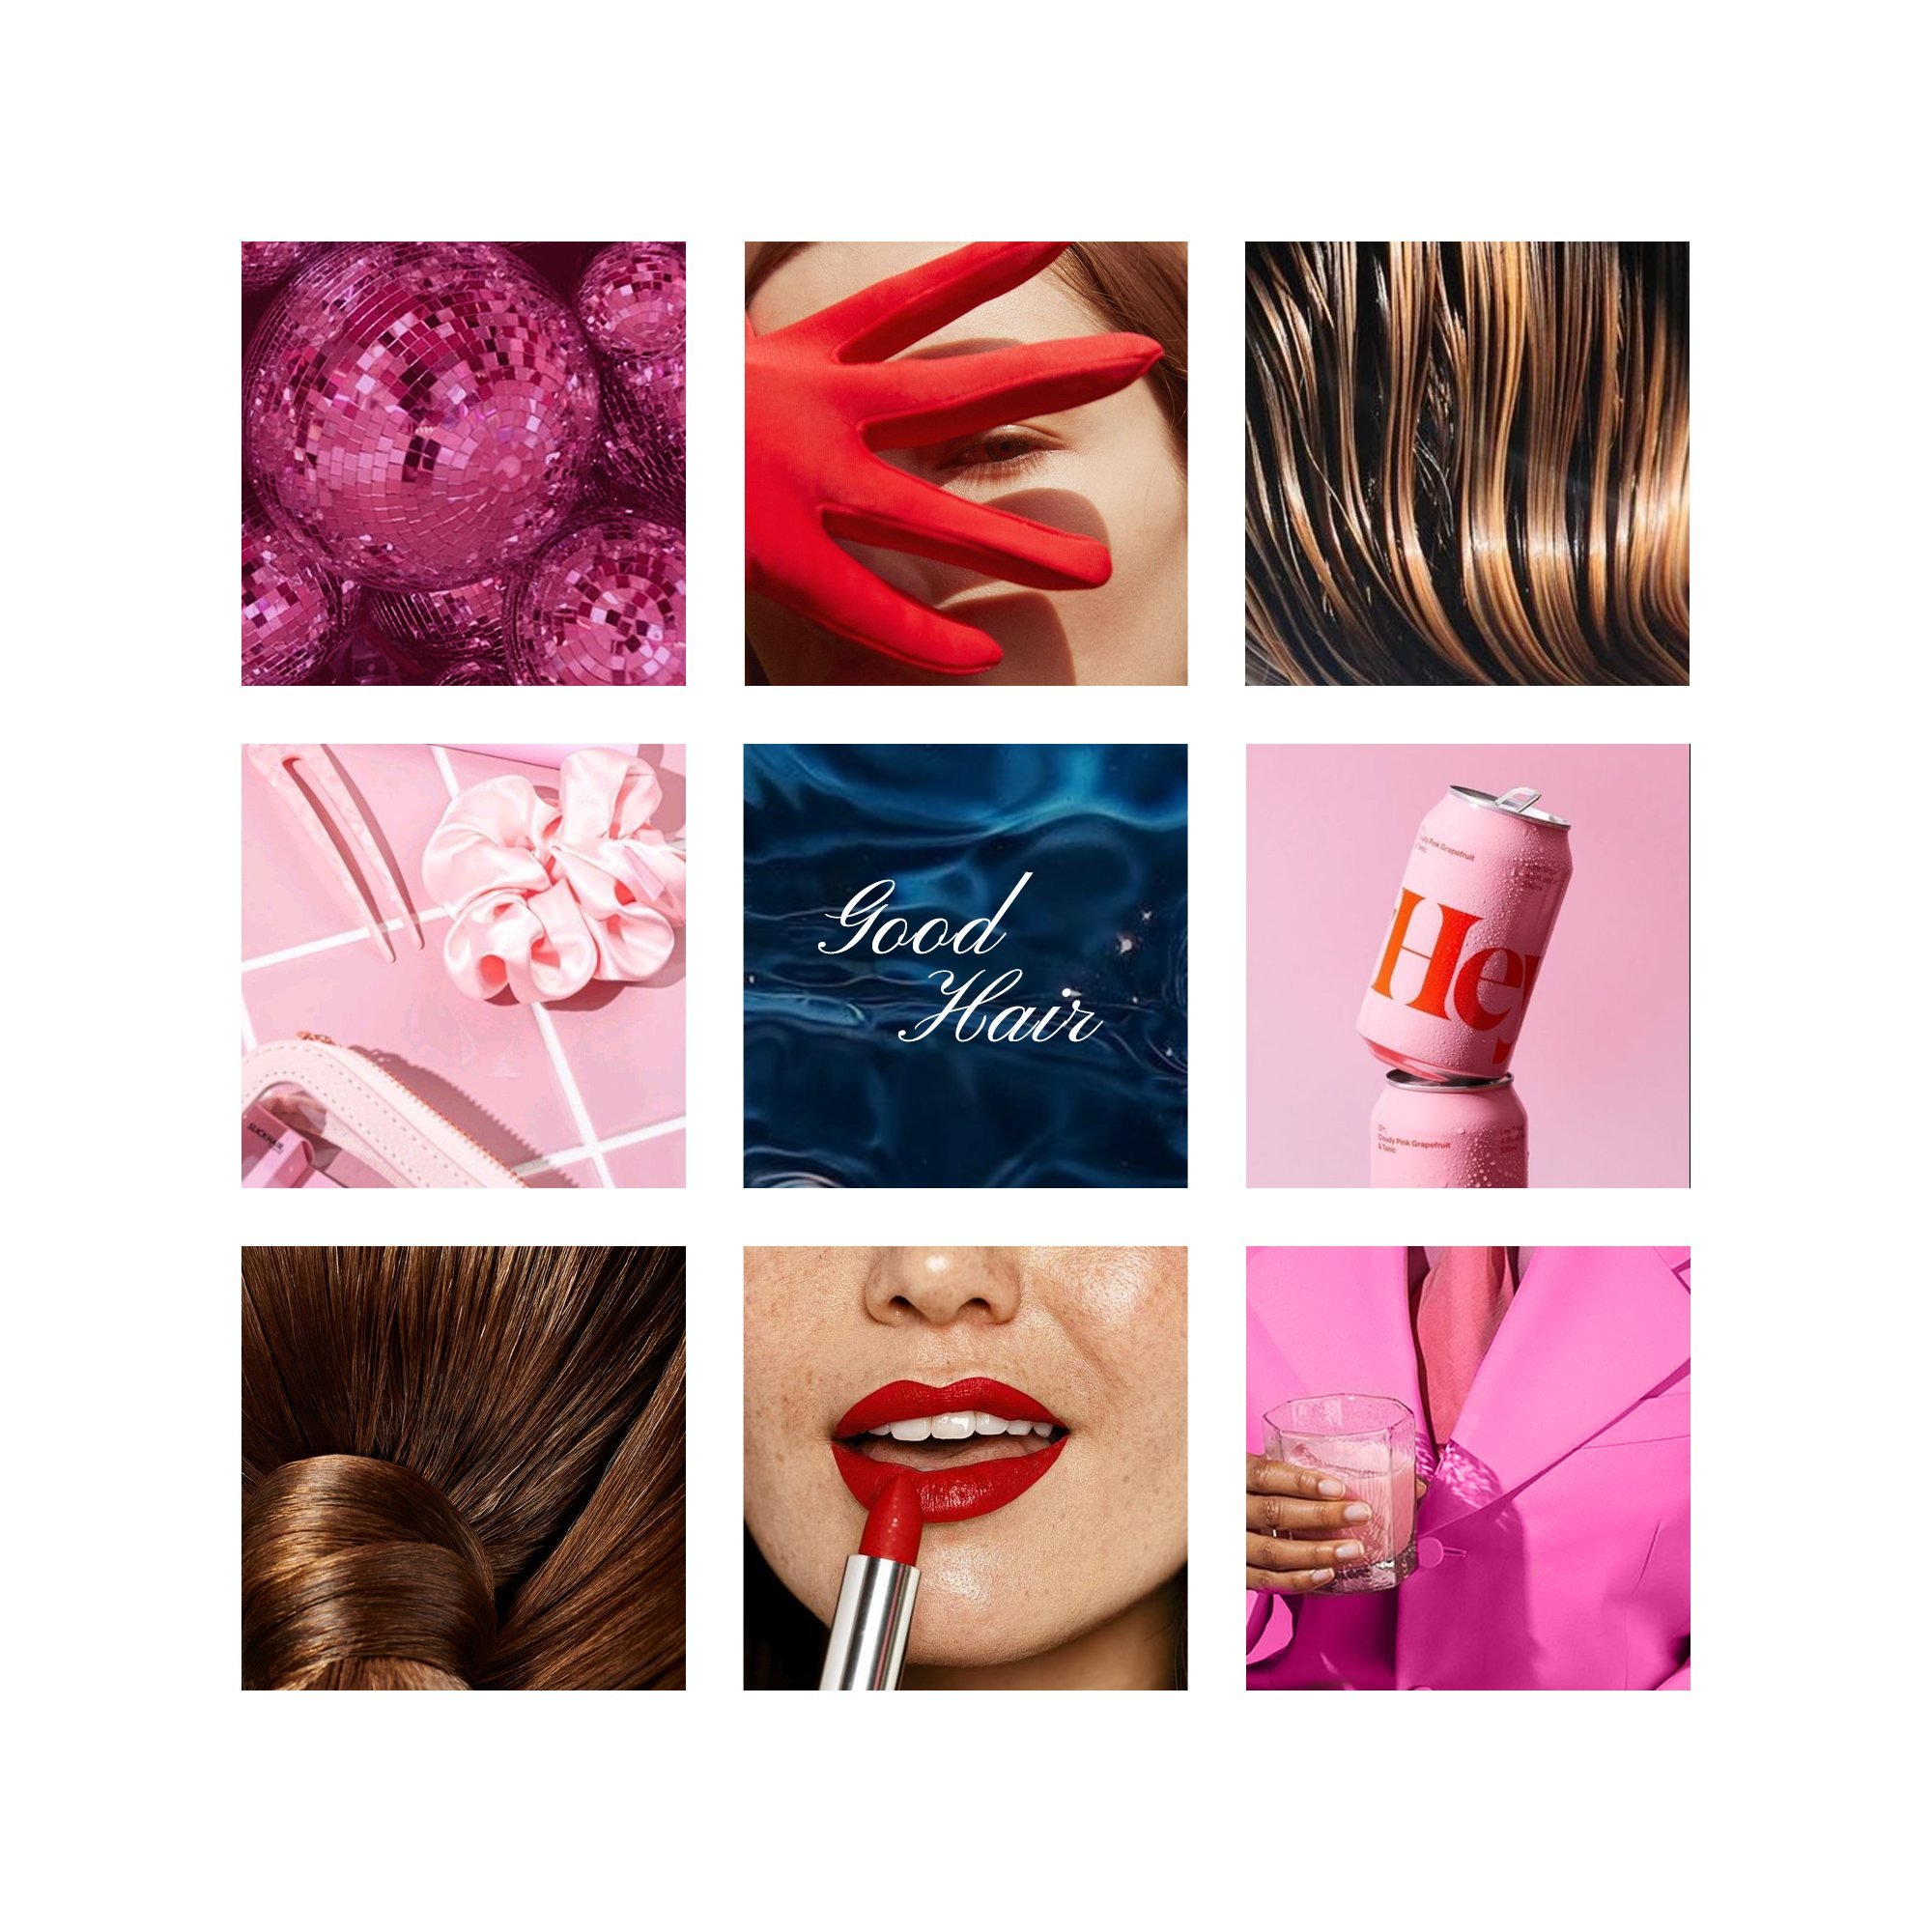 Mood board for our incredible client @hilaryandcosalon 🌸🩷✂️

Did you hear? Colour is IN! No more shying away from bold branding. When we undertake a new client our first order of business is dreaming! Mood boards allow us to brainstorm the new feel